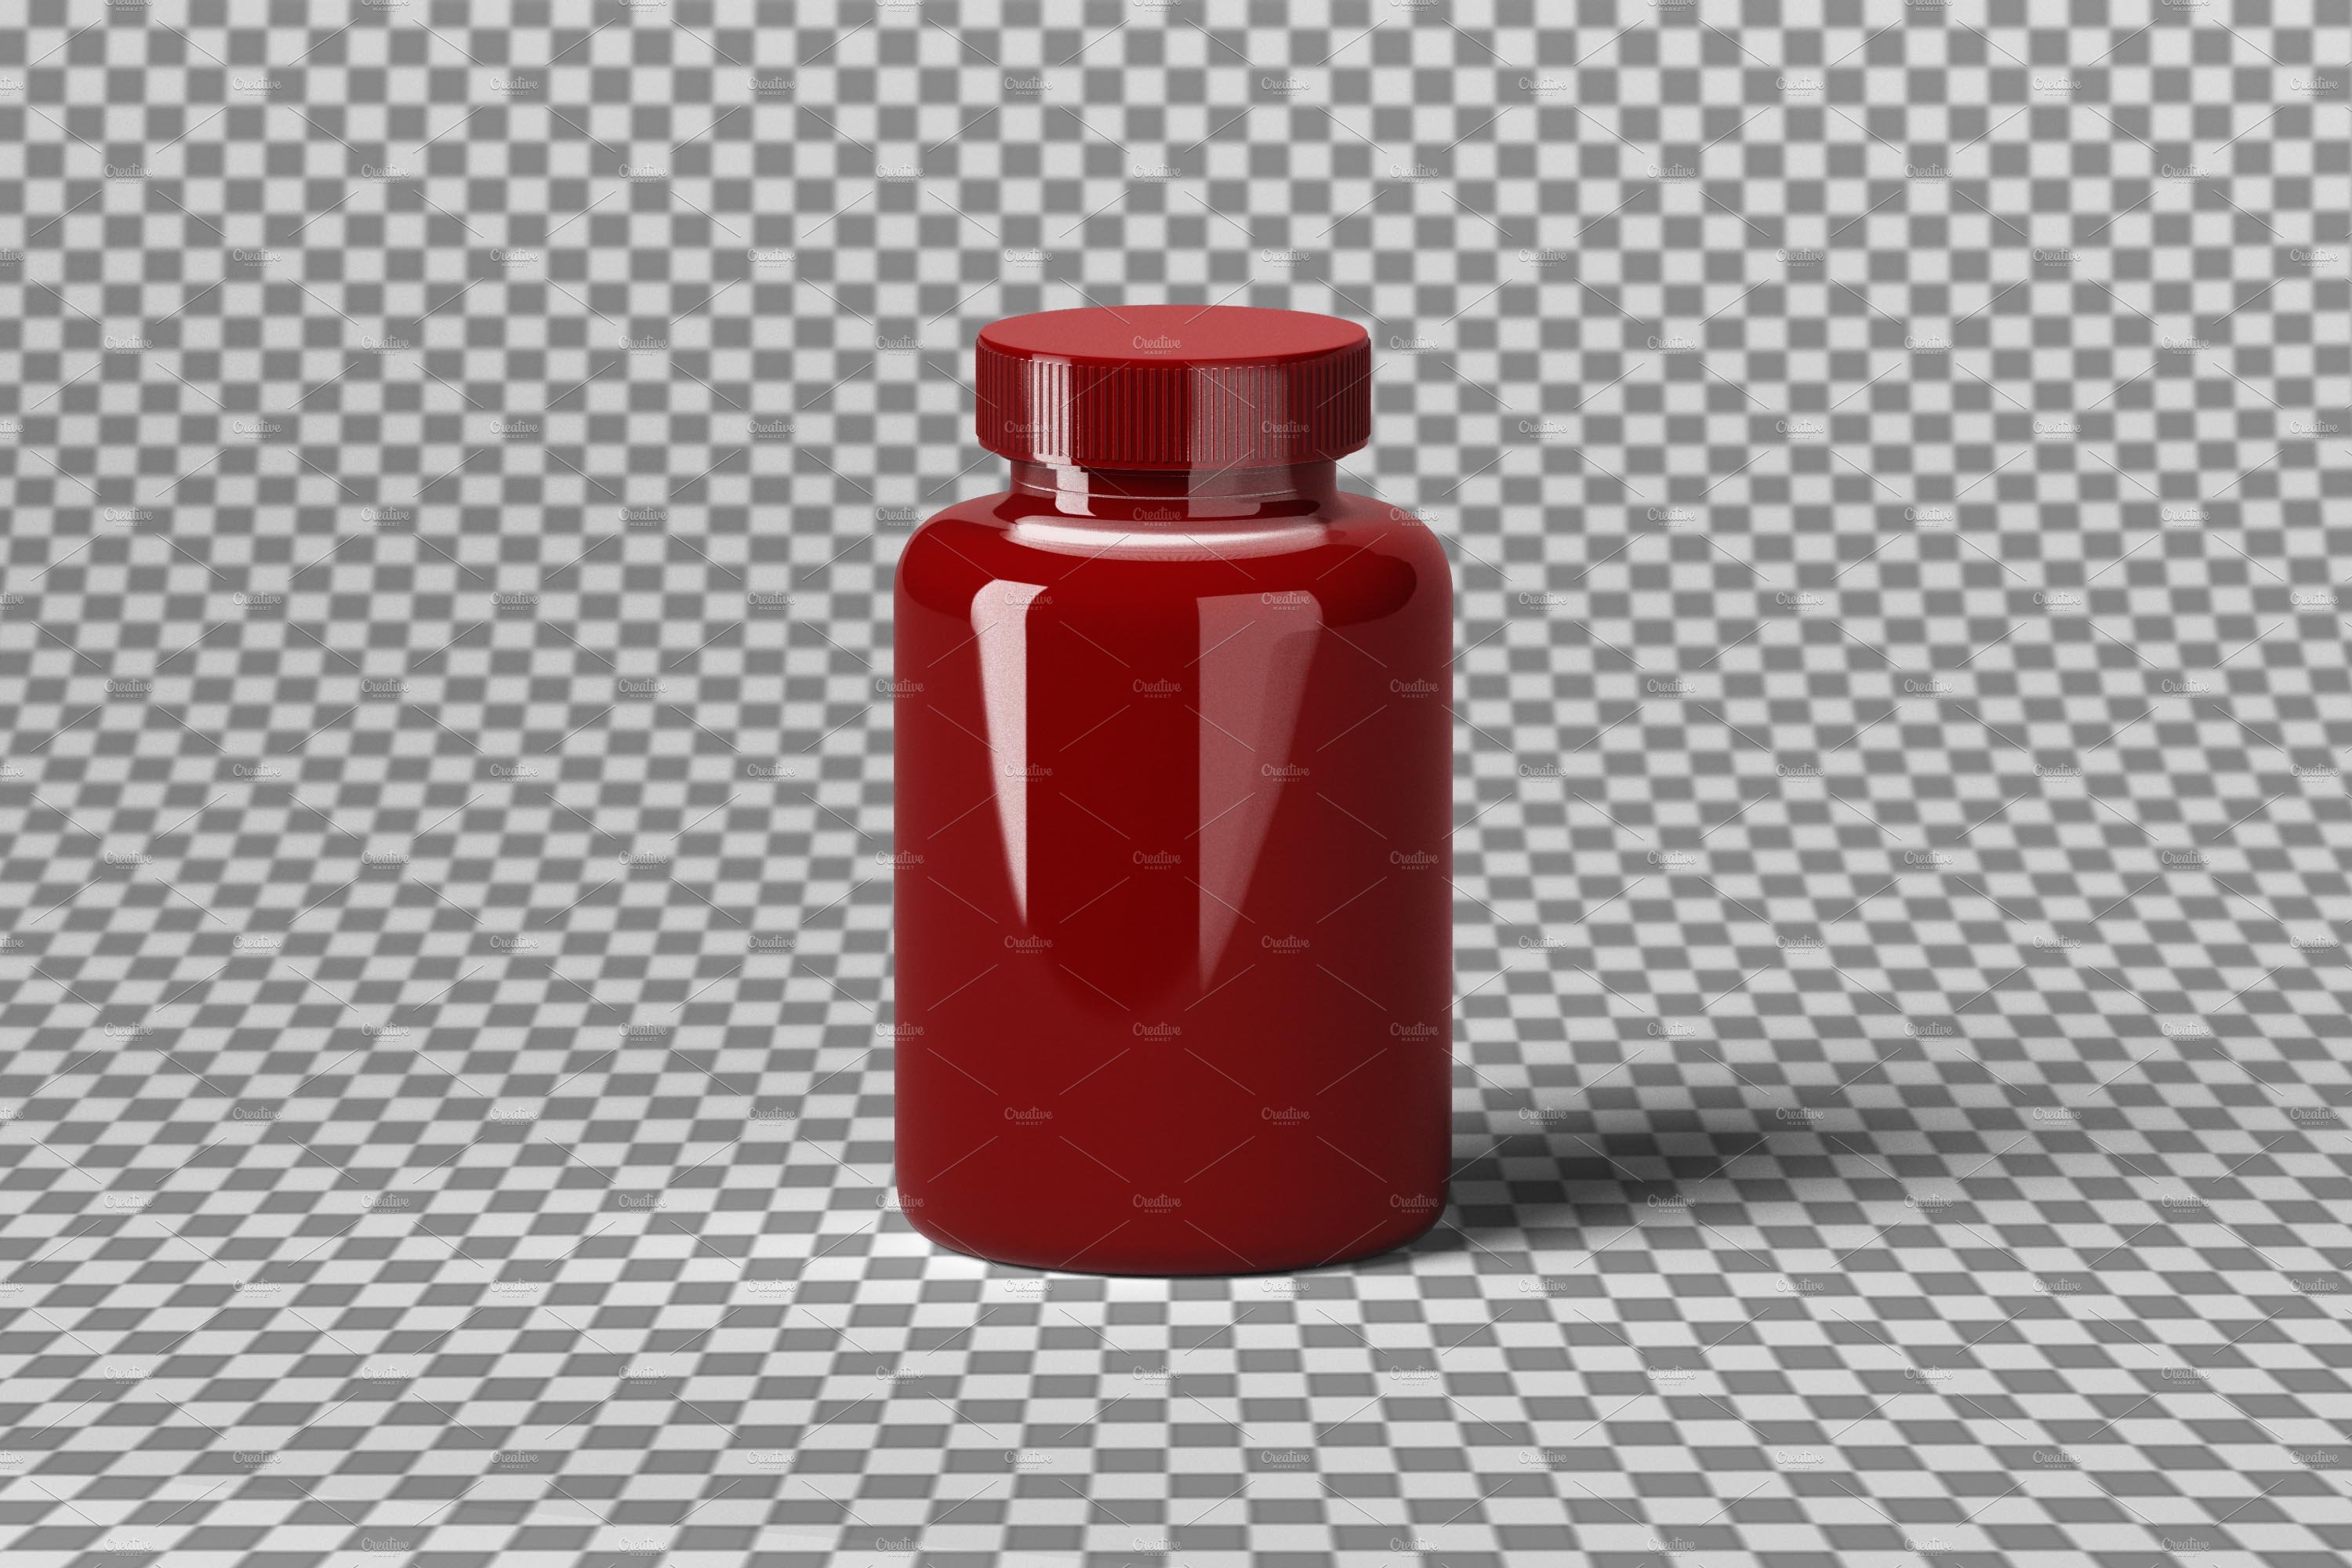 One red pill bottle on a transparent background.